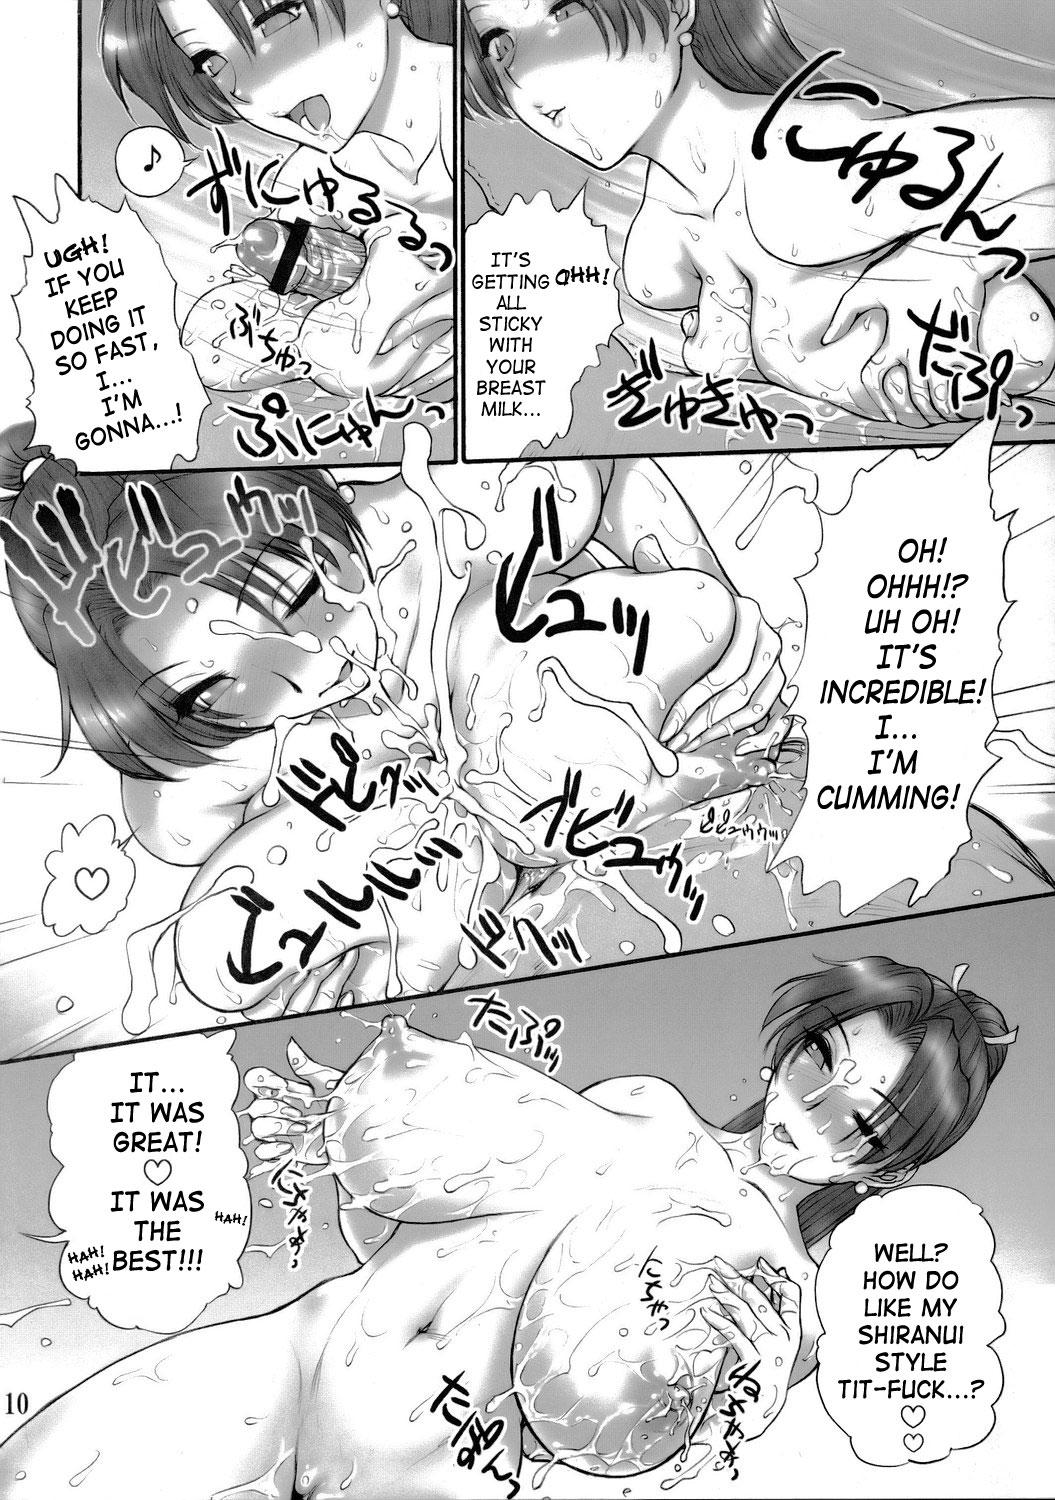 Hairy Pussy (SC29) [Shinnihon Pepsitou (St. Germain-sal)] Report Concerning Kyoku-gen-ryuu (The King of Fighters) [English] [SaHa] - King of fighters Amiga - Page 11